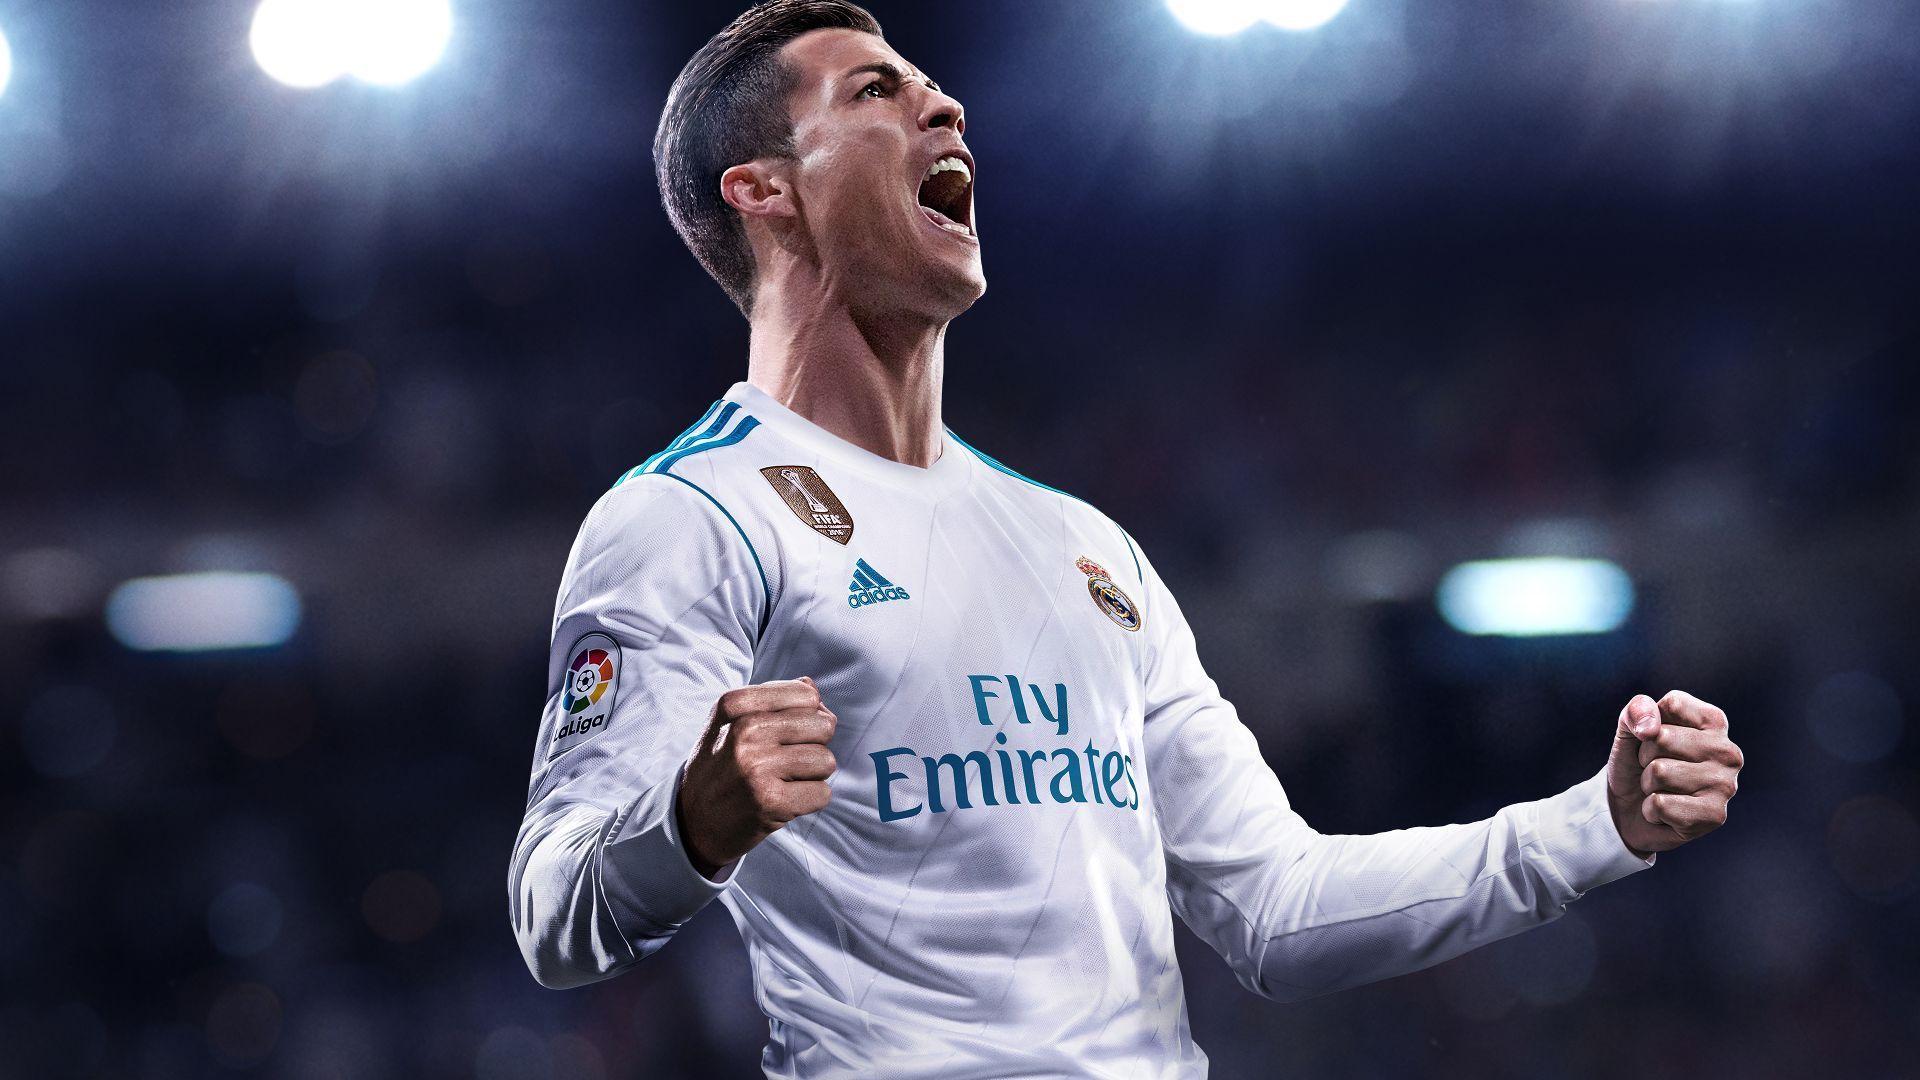 FIFA 18 reclaims top spot on UK charts, overtaking Call of Duty